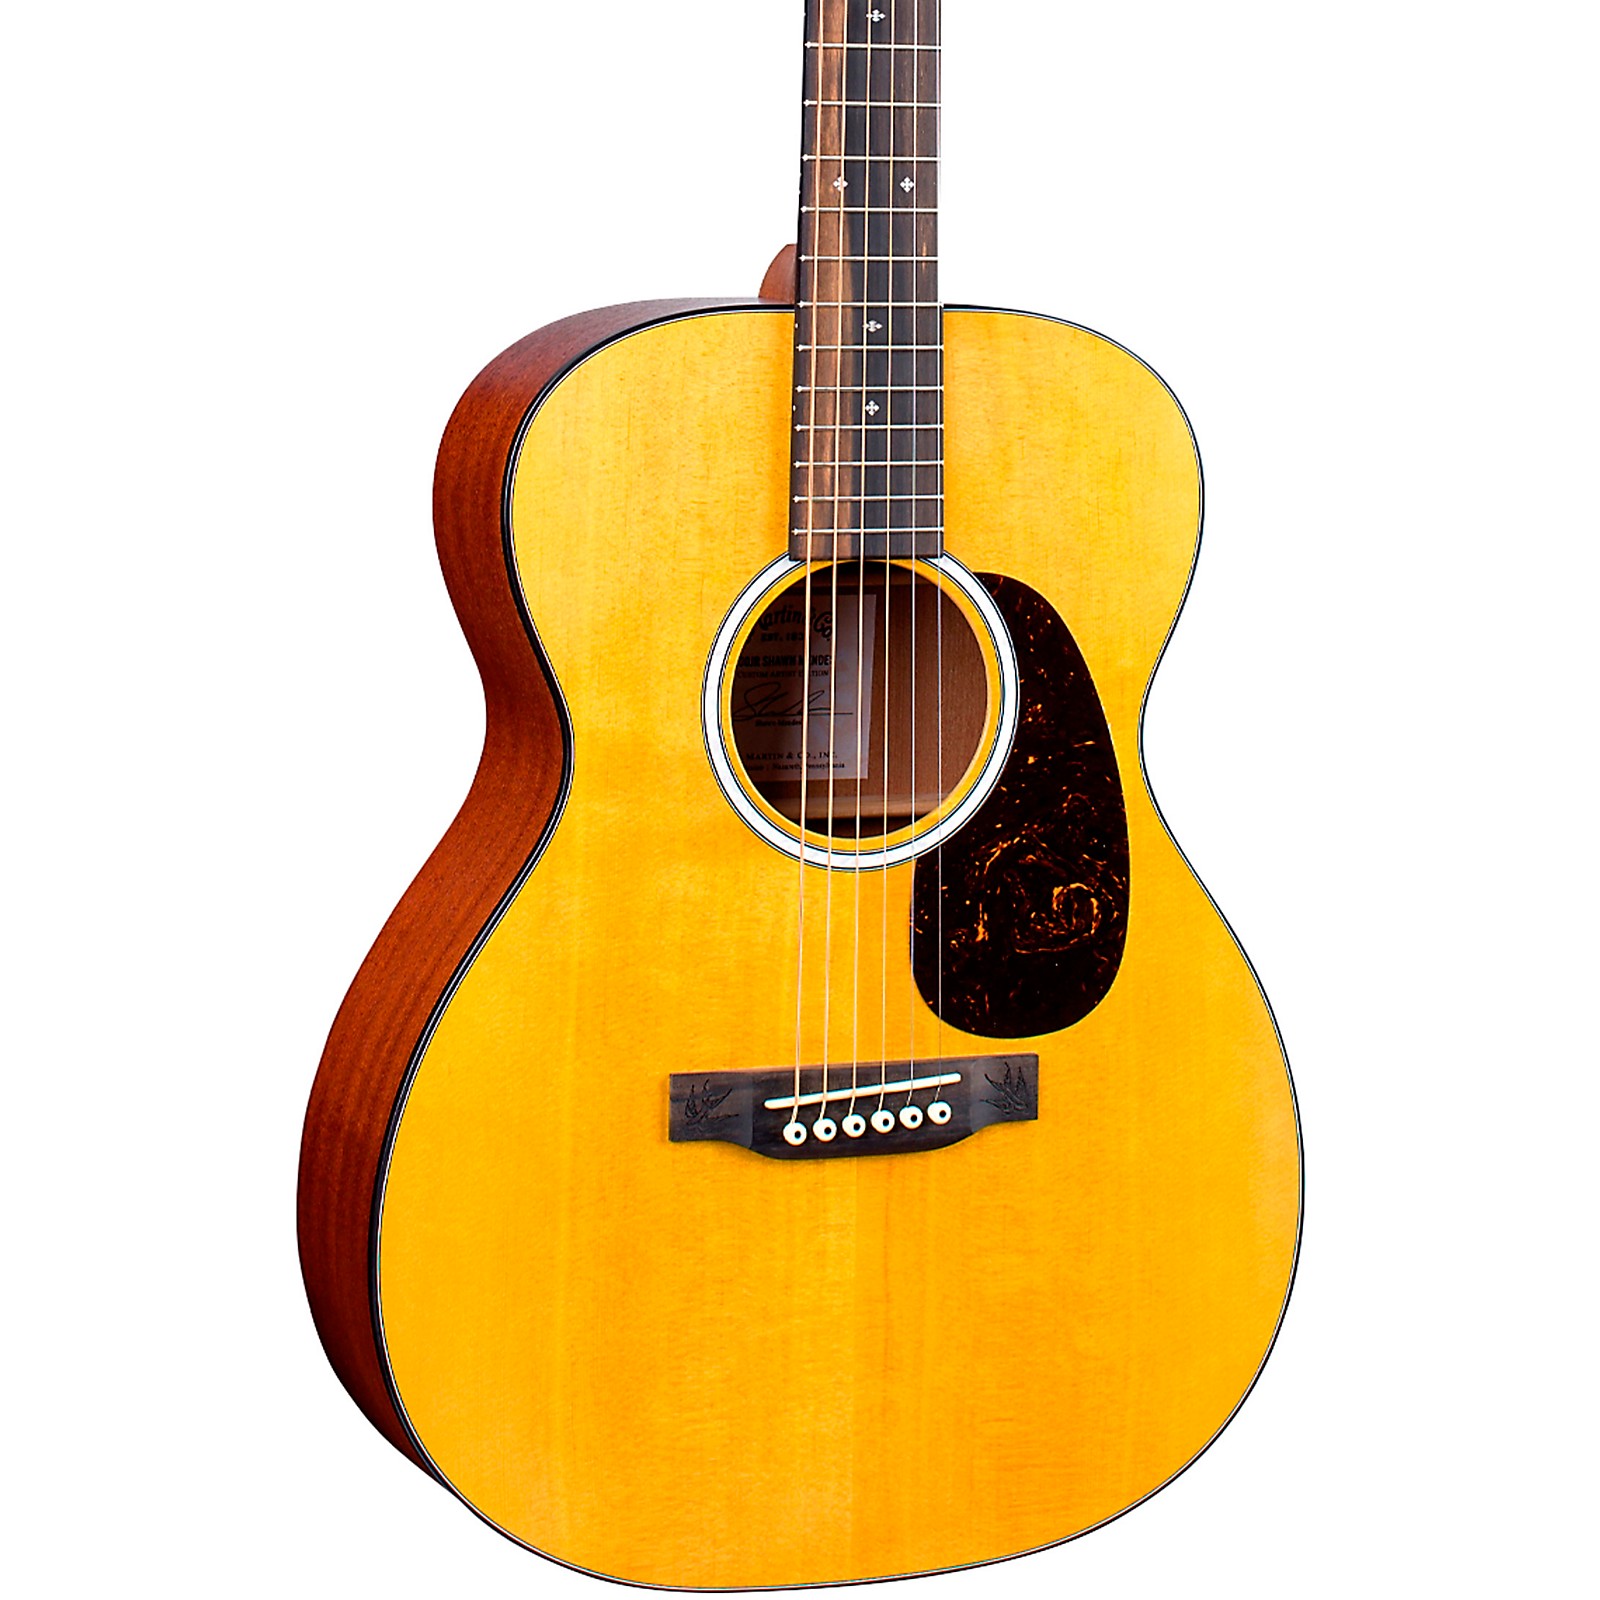 Martin 000-JRE Shawn Mendes Custom Signature Edition Acoustic